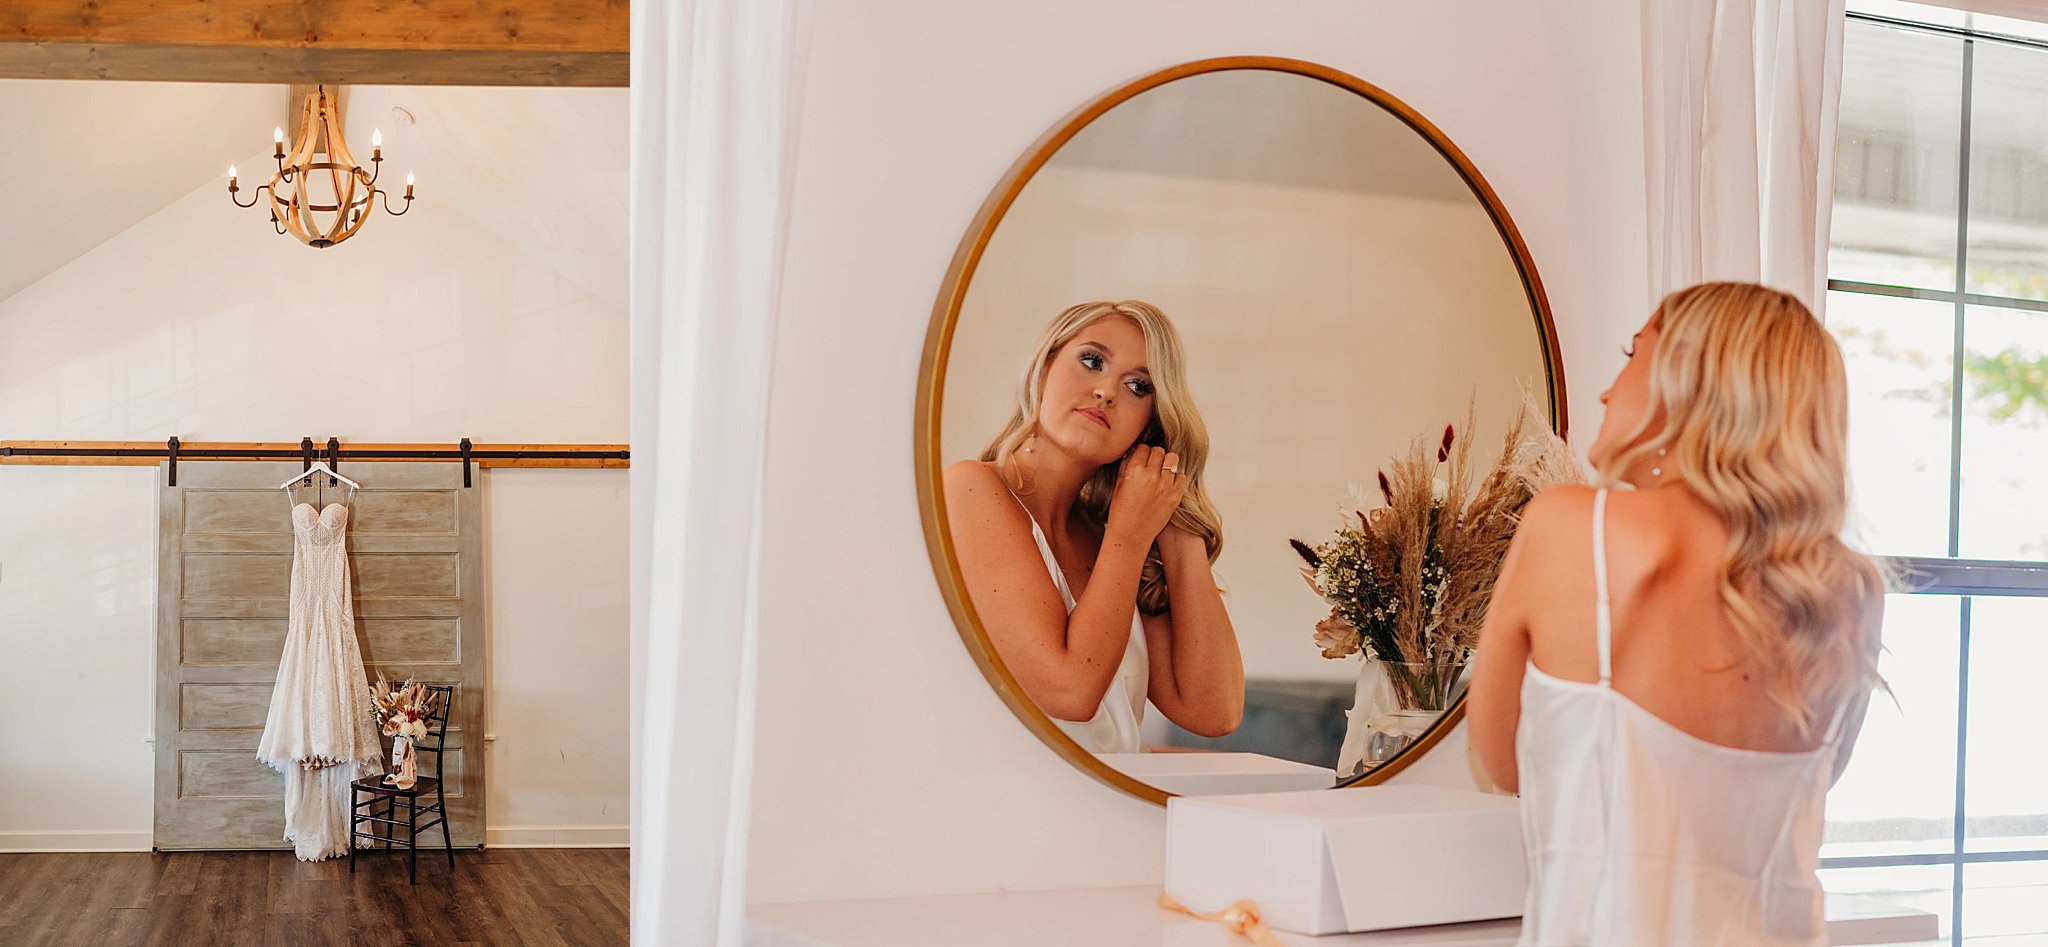 collage of photos with dress hanging in front of wooden doors and a bouquet on a chair. Next photo is a blonde bride putting in earrings in front of a round mirror